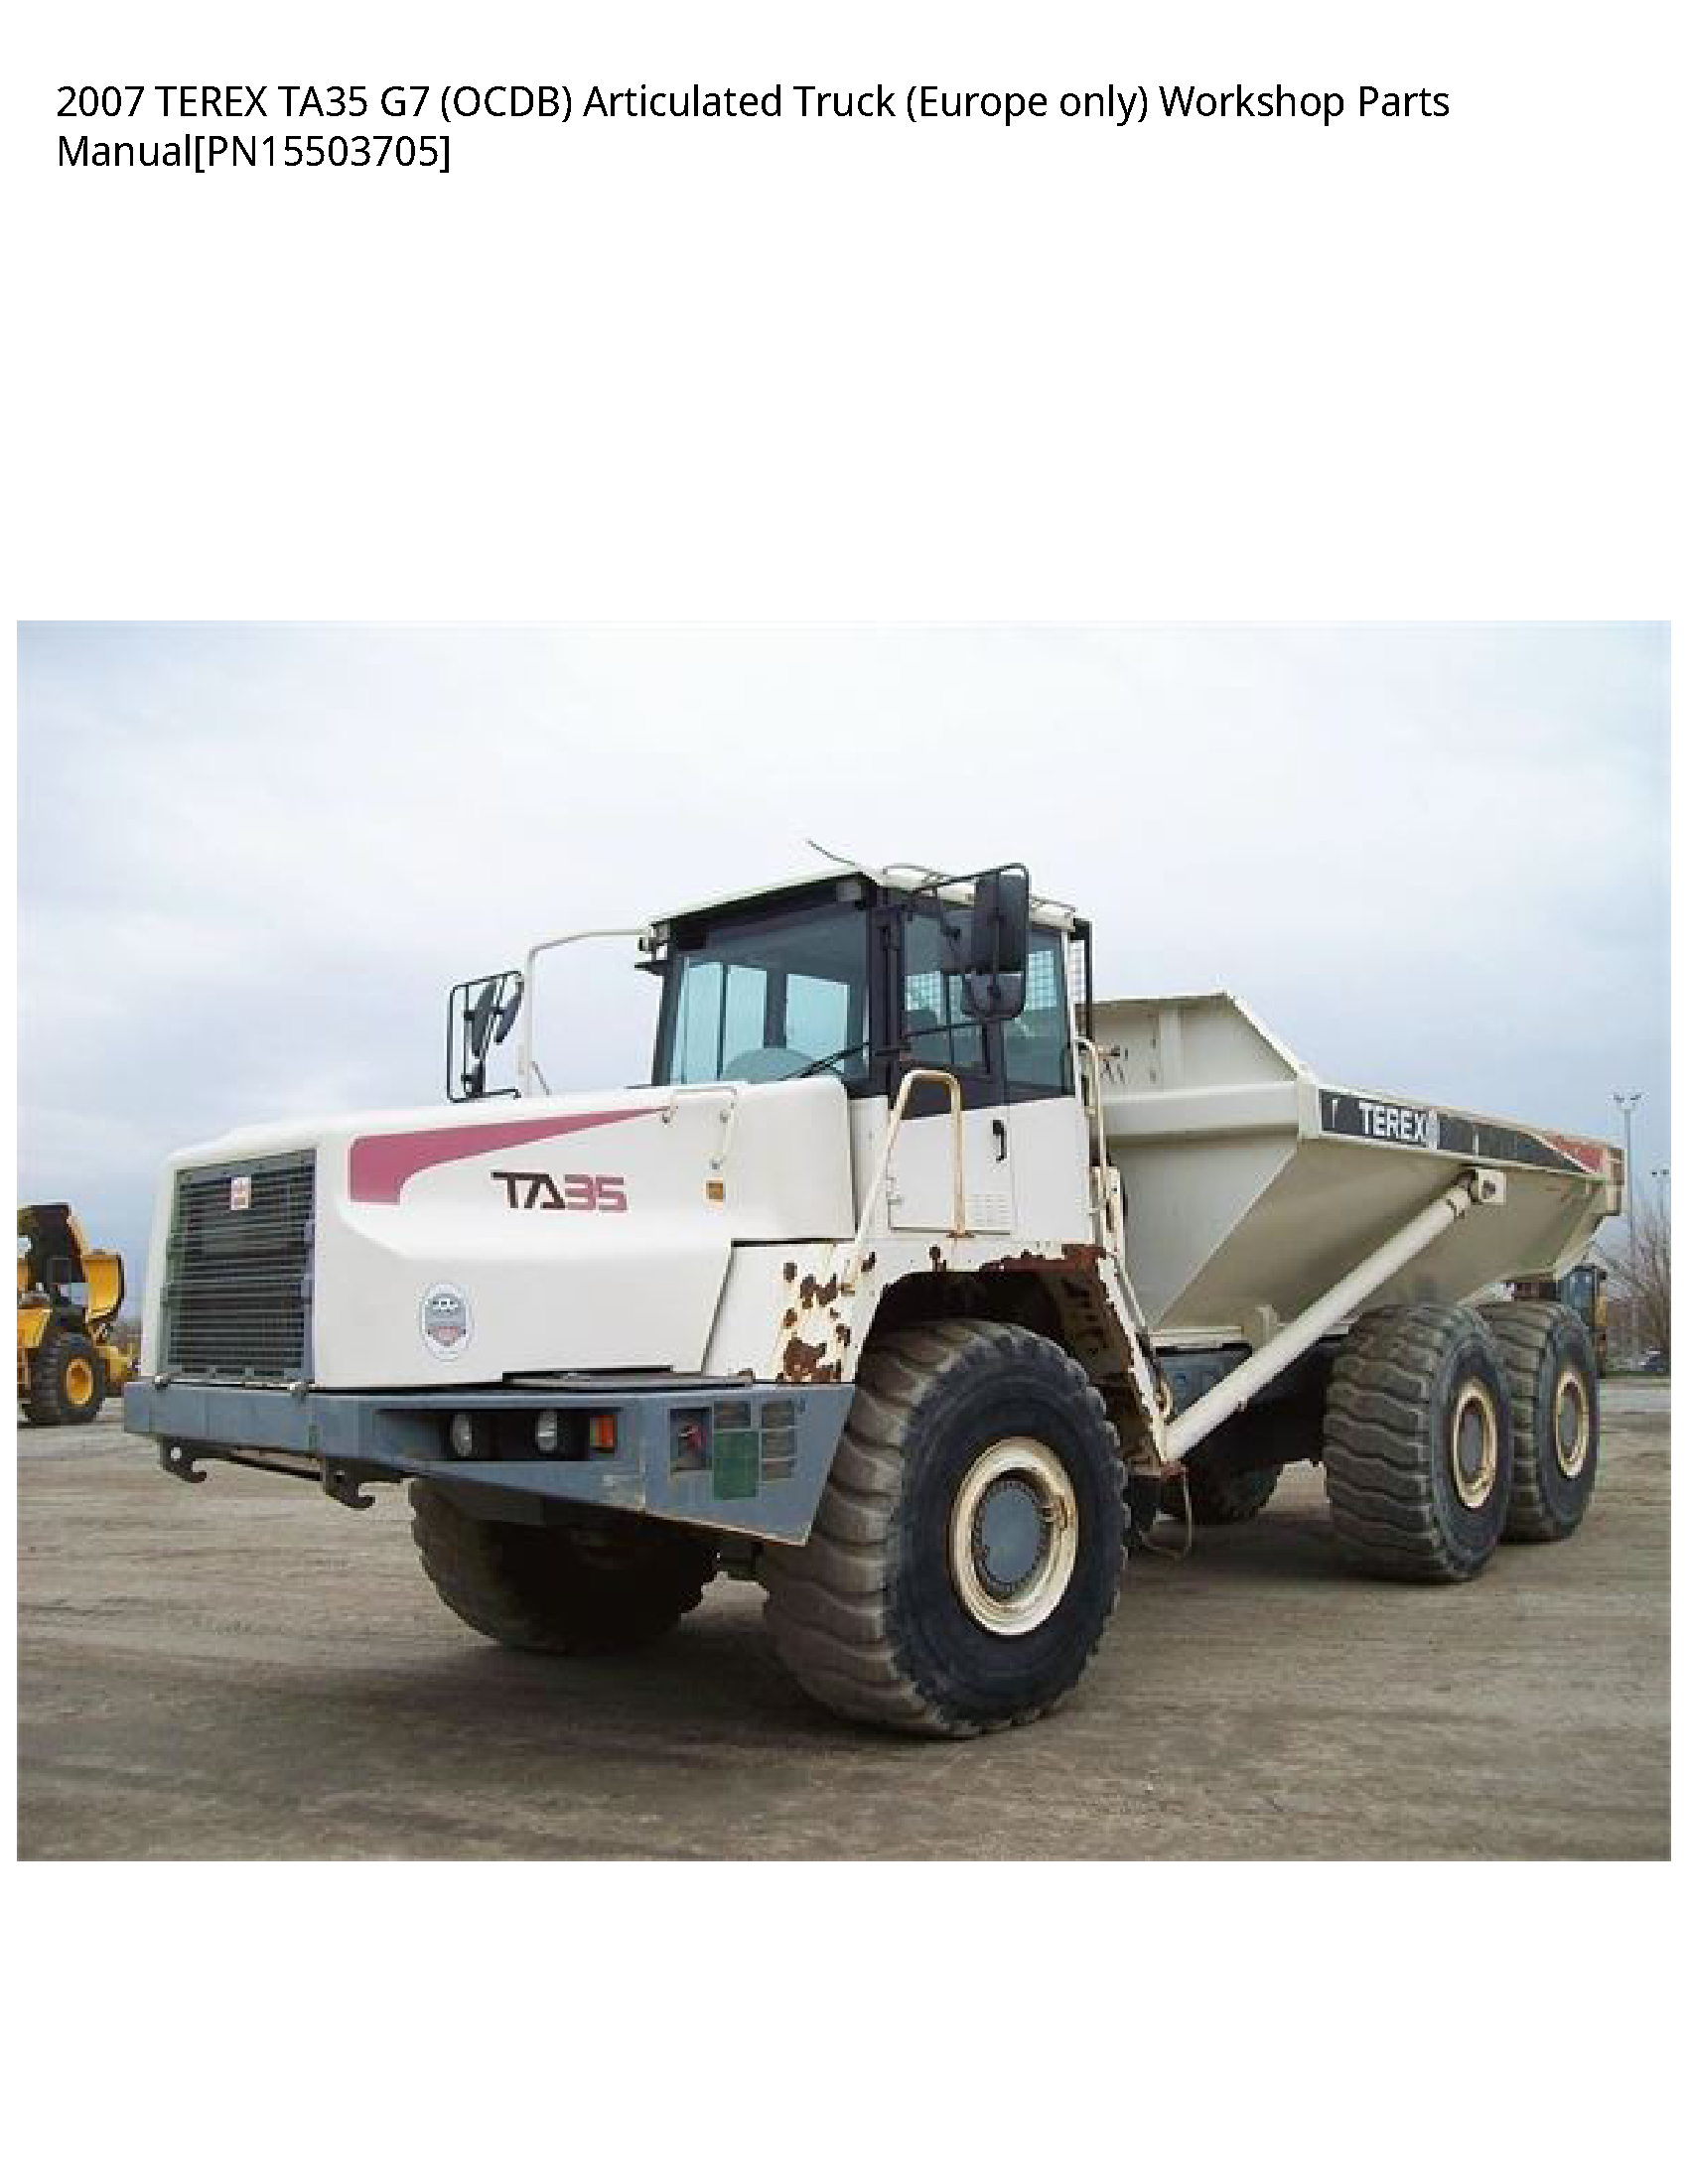 Terex TA35 (OCDB) Articulated Truck (Europe only) Parts manual